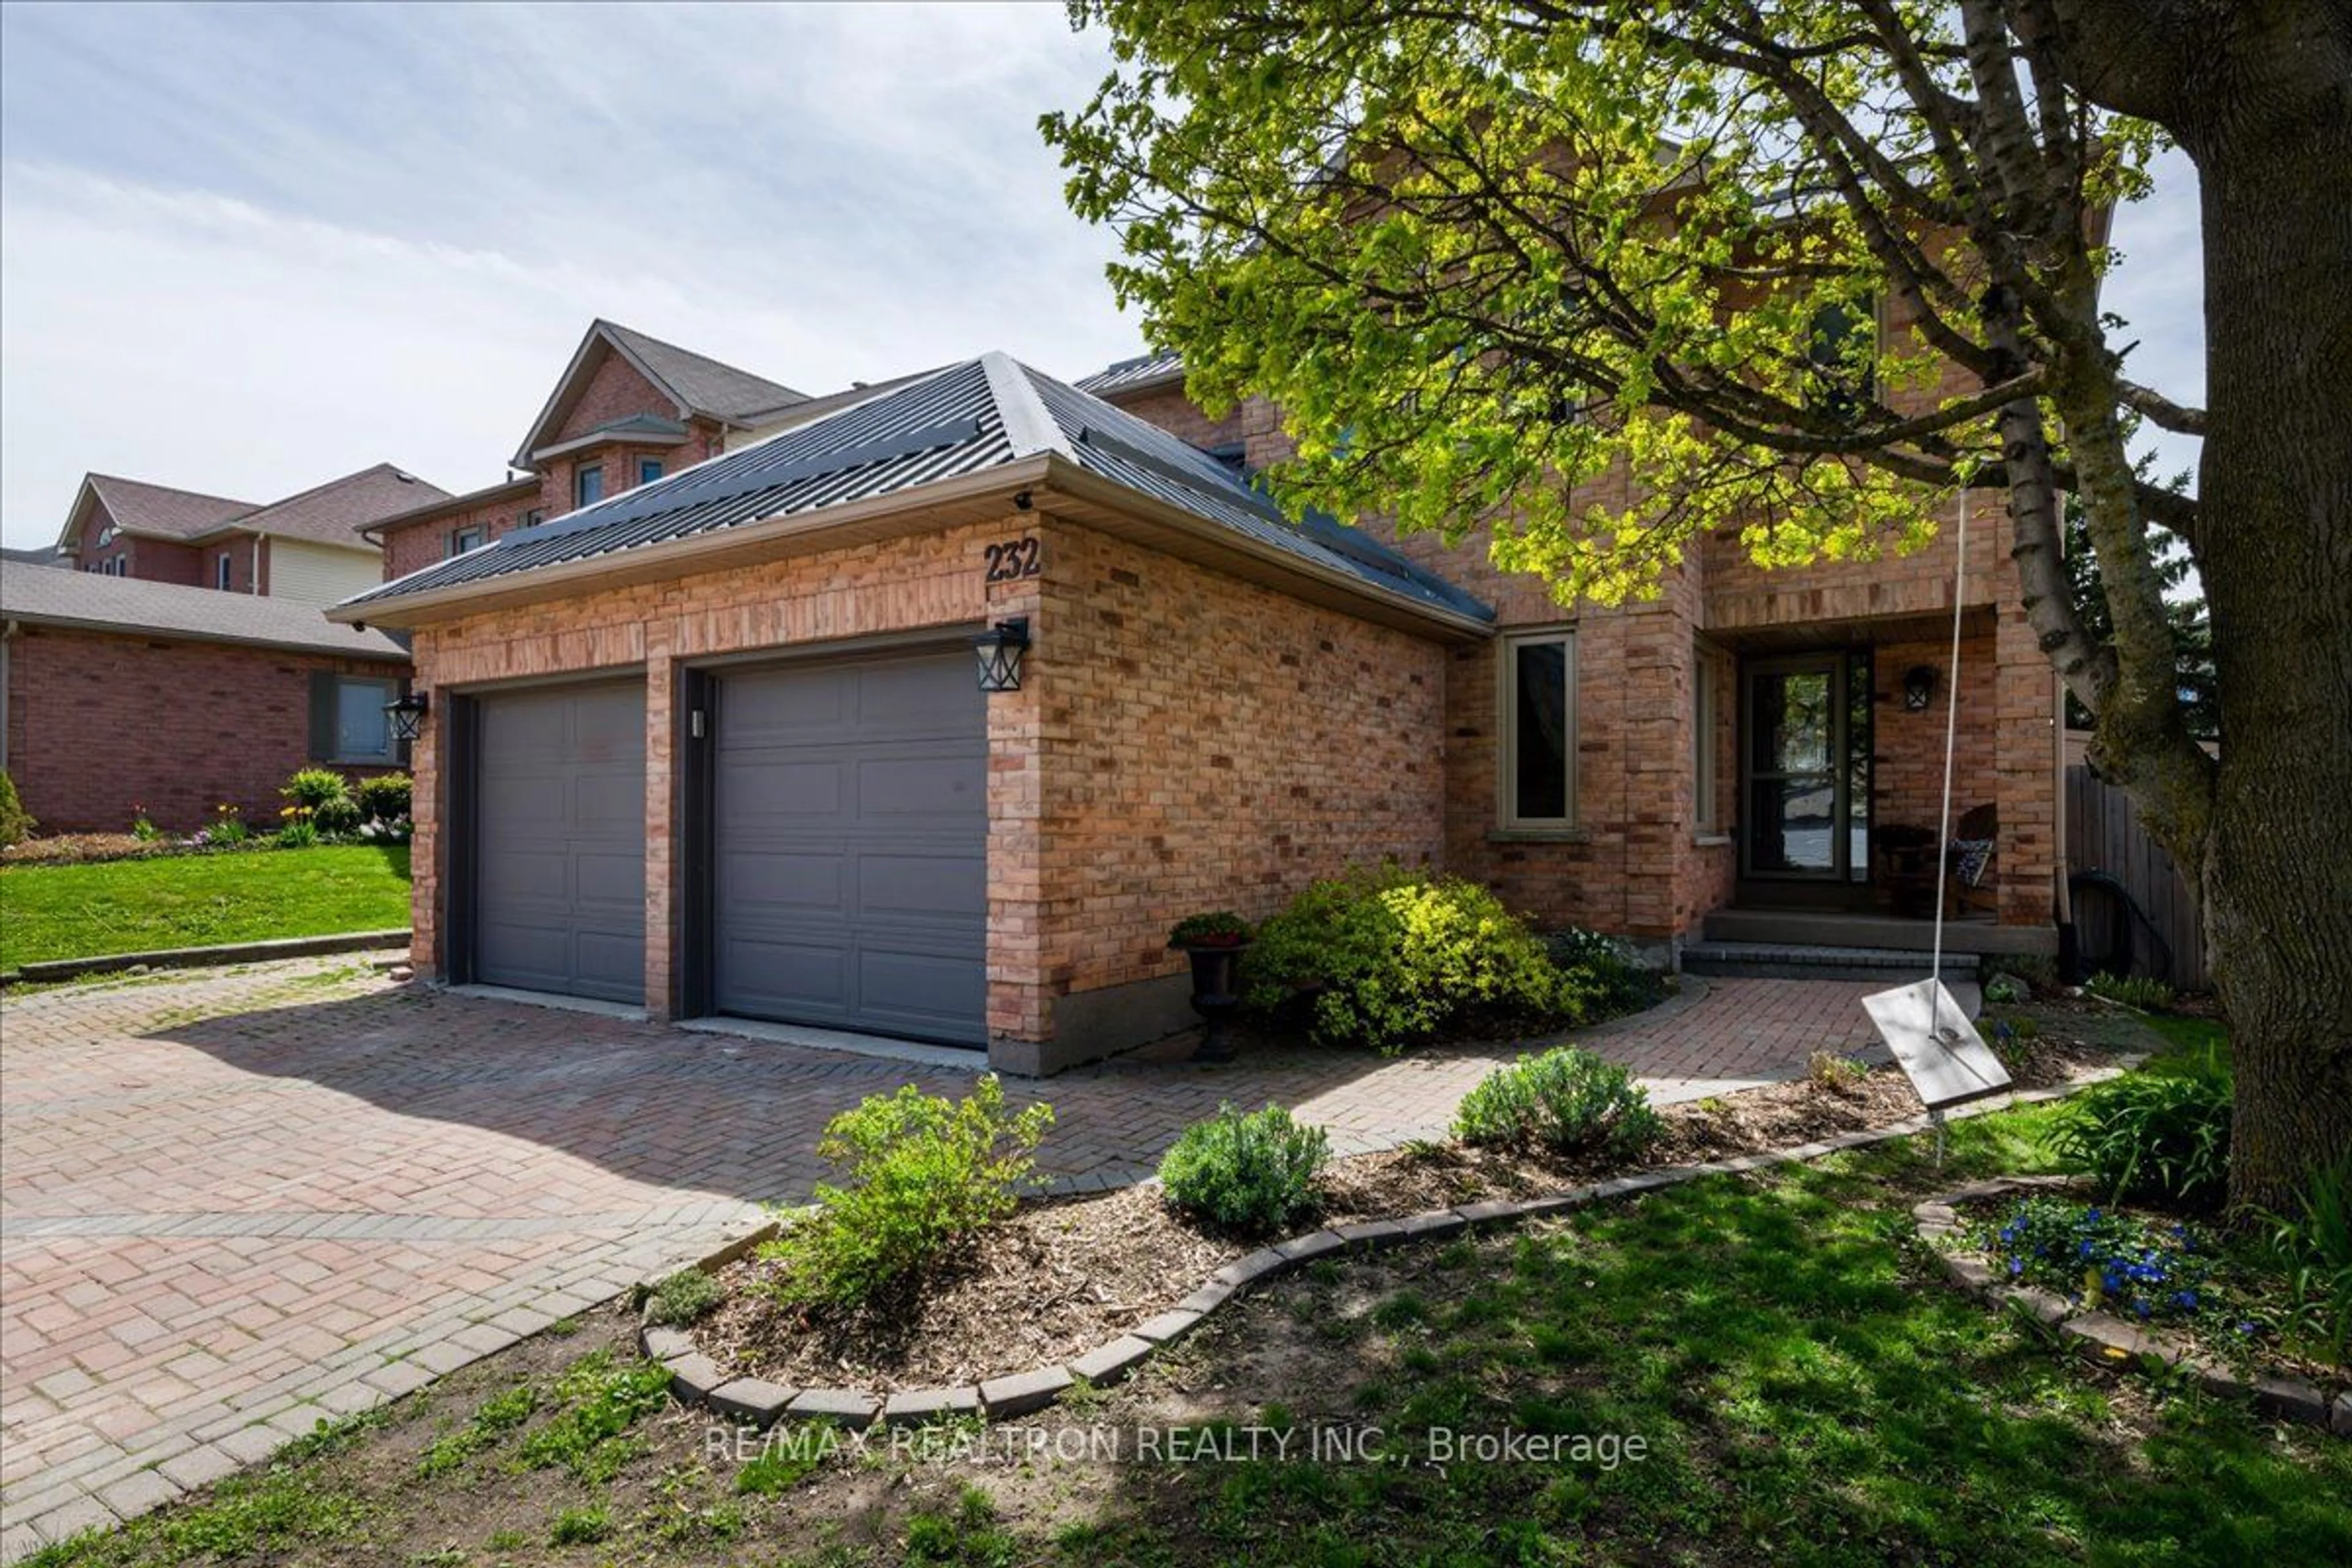 Home with brick exterior material for 232 Cardinal St, Barrie Ontario L4M 6G9